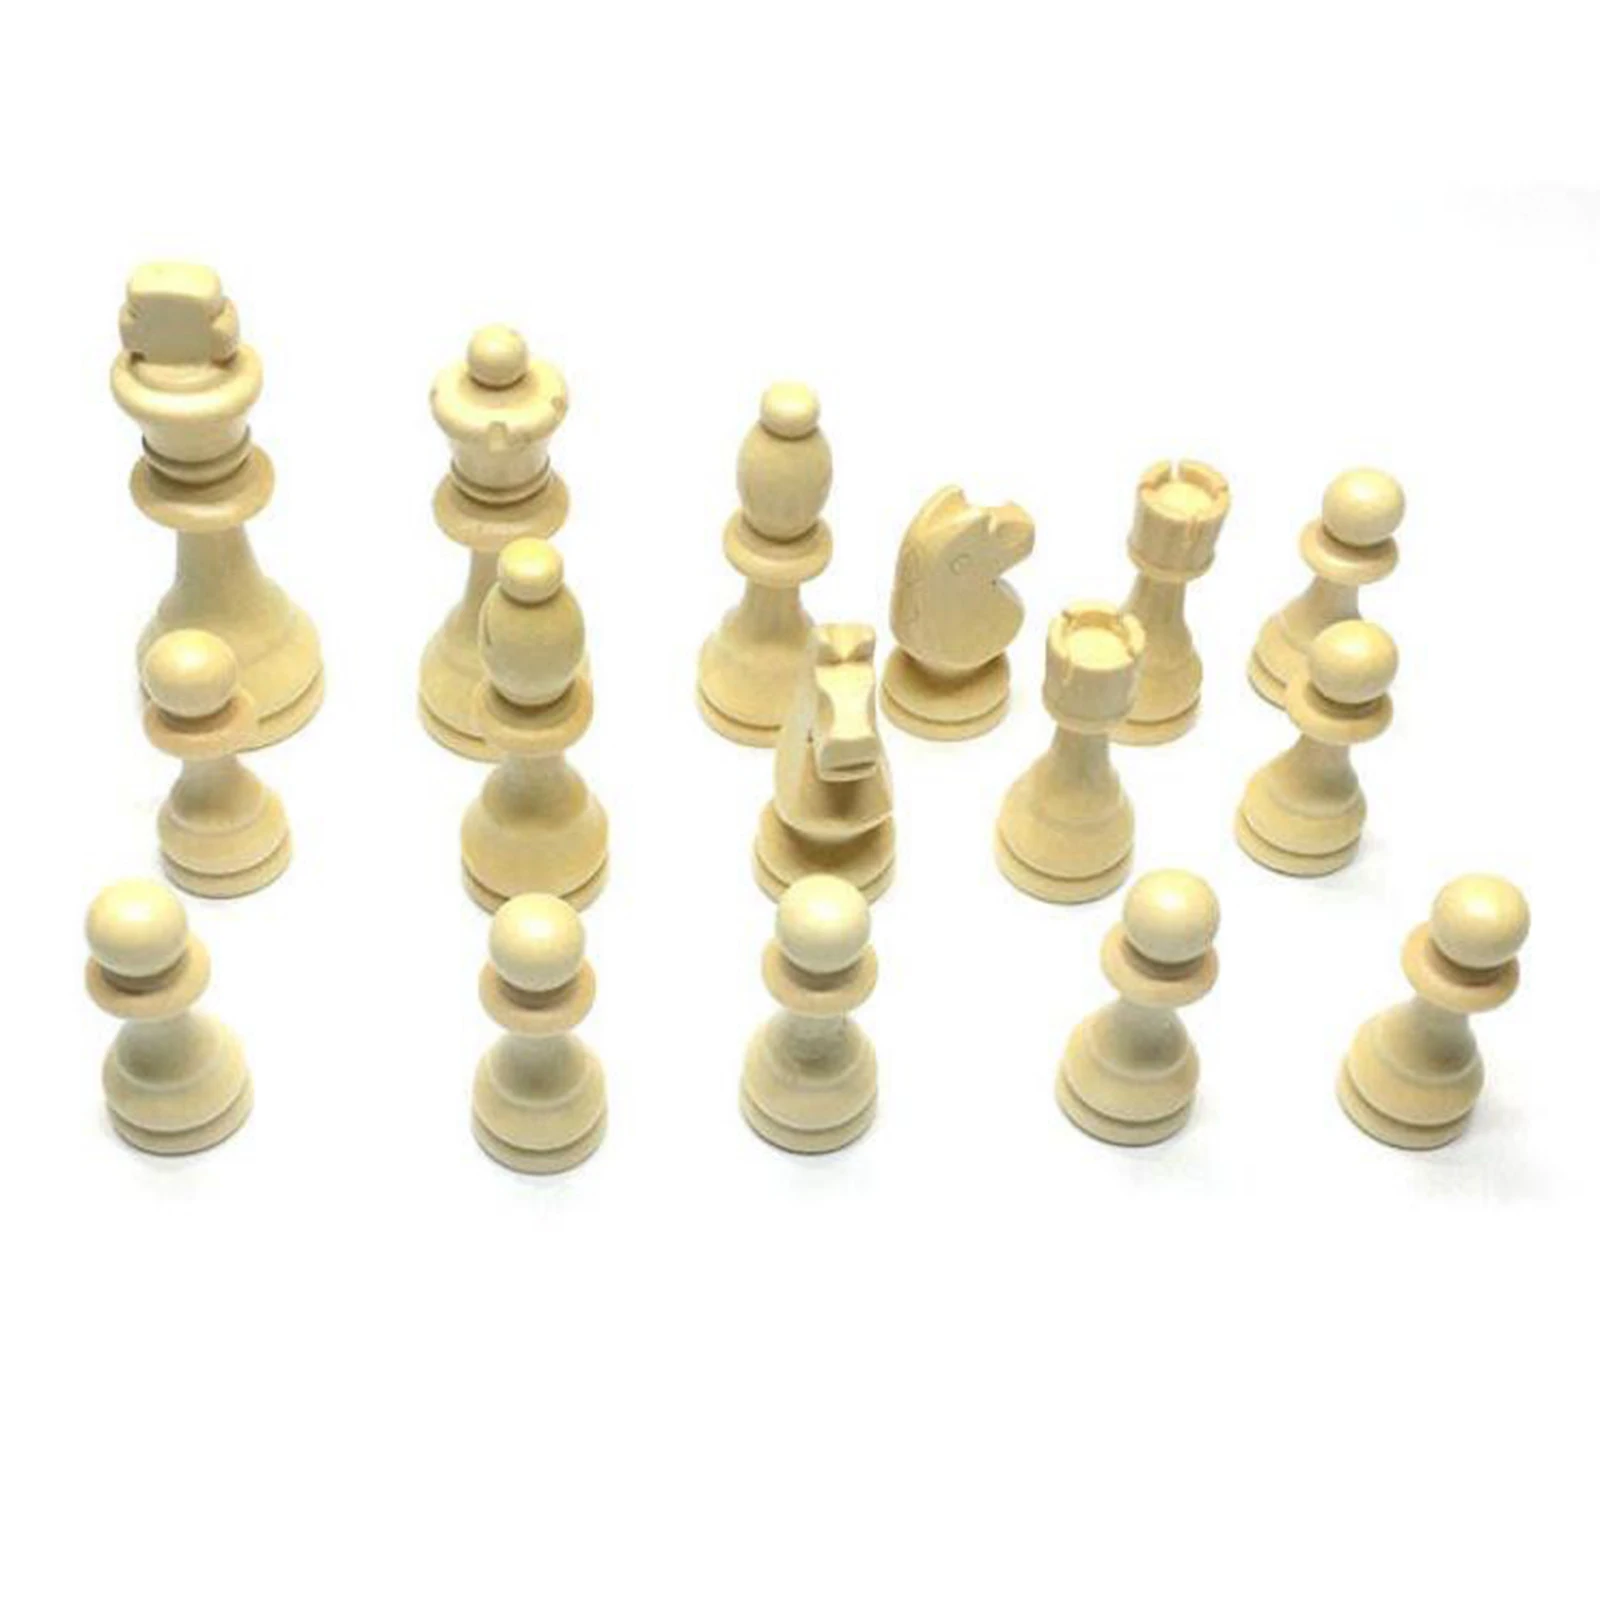 Wooden Chess Pieces 32PCS International-Chess Pieces Wood Chessmen Pieces Party Board Game Toy Accessories Chess Pieces